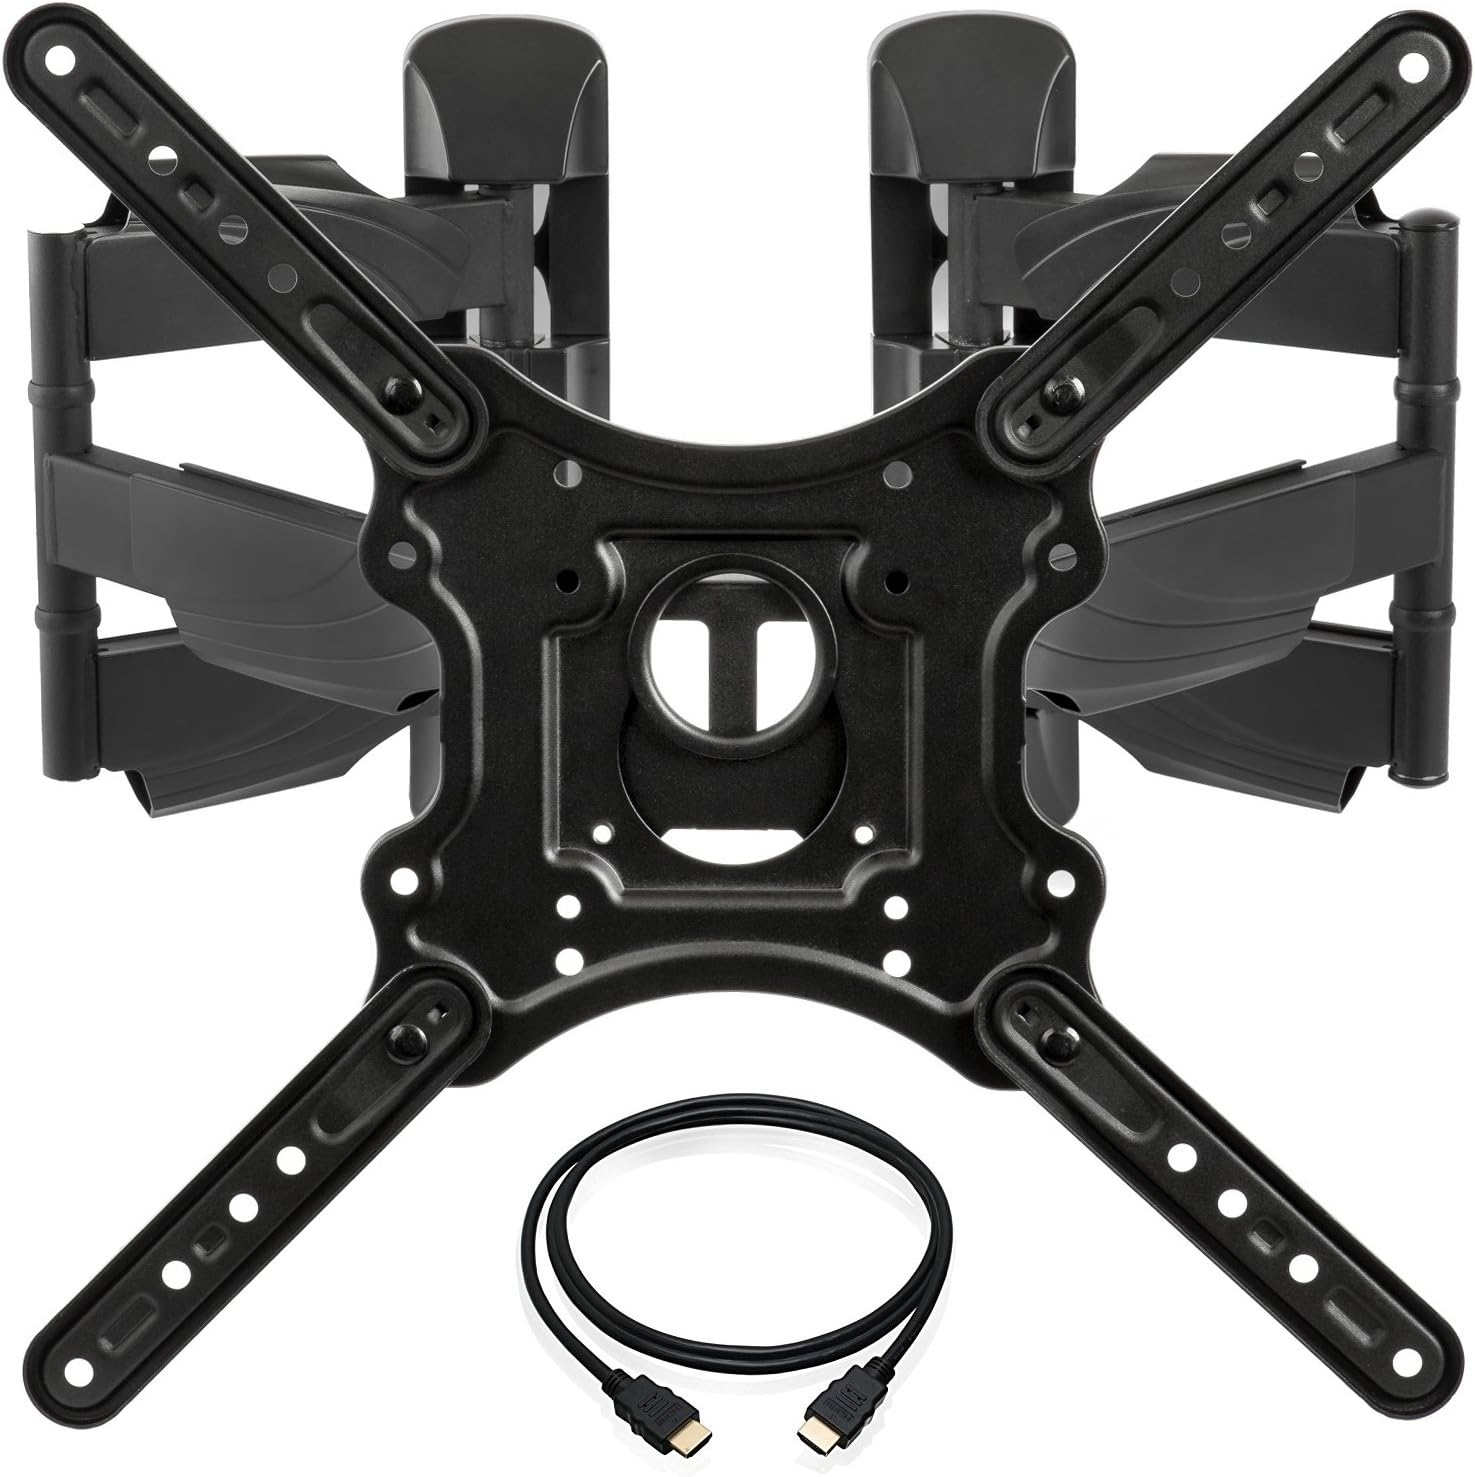 InstallerParts Corner TV Wall Mount for Most 23-55 Inch LED LCD OLED Plasma Flat Screen TVs with Full Motion Swivel and Tilt Articulating Dual Arm - VESA 400x400, Holds 132lbs, HDMI Cable